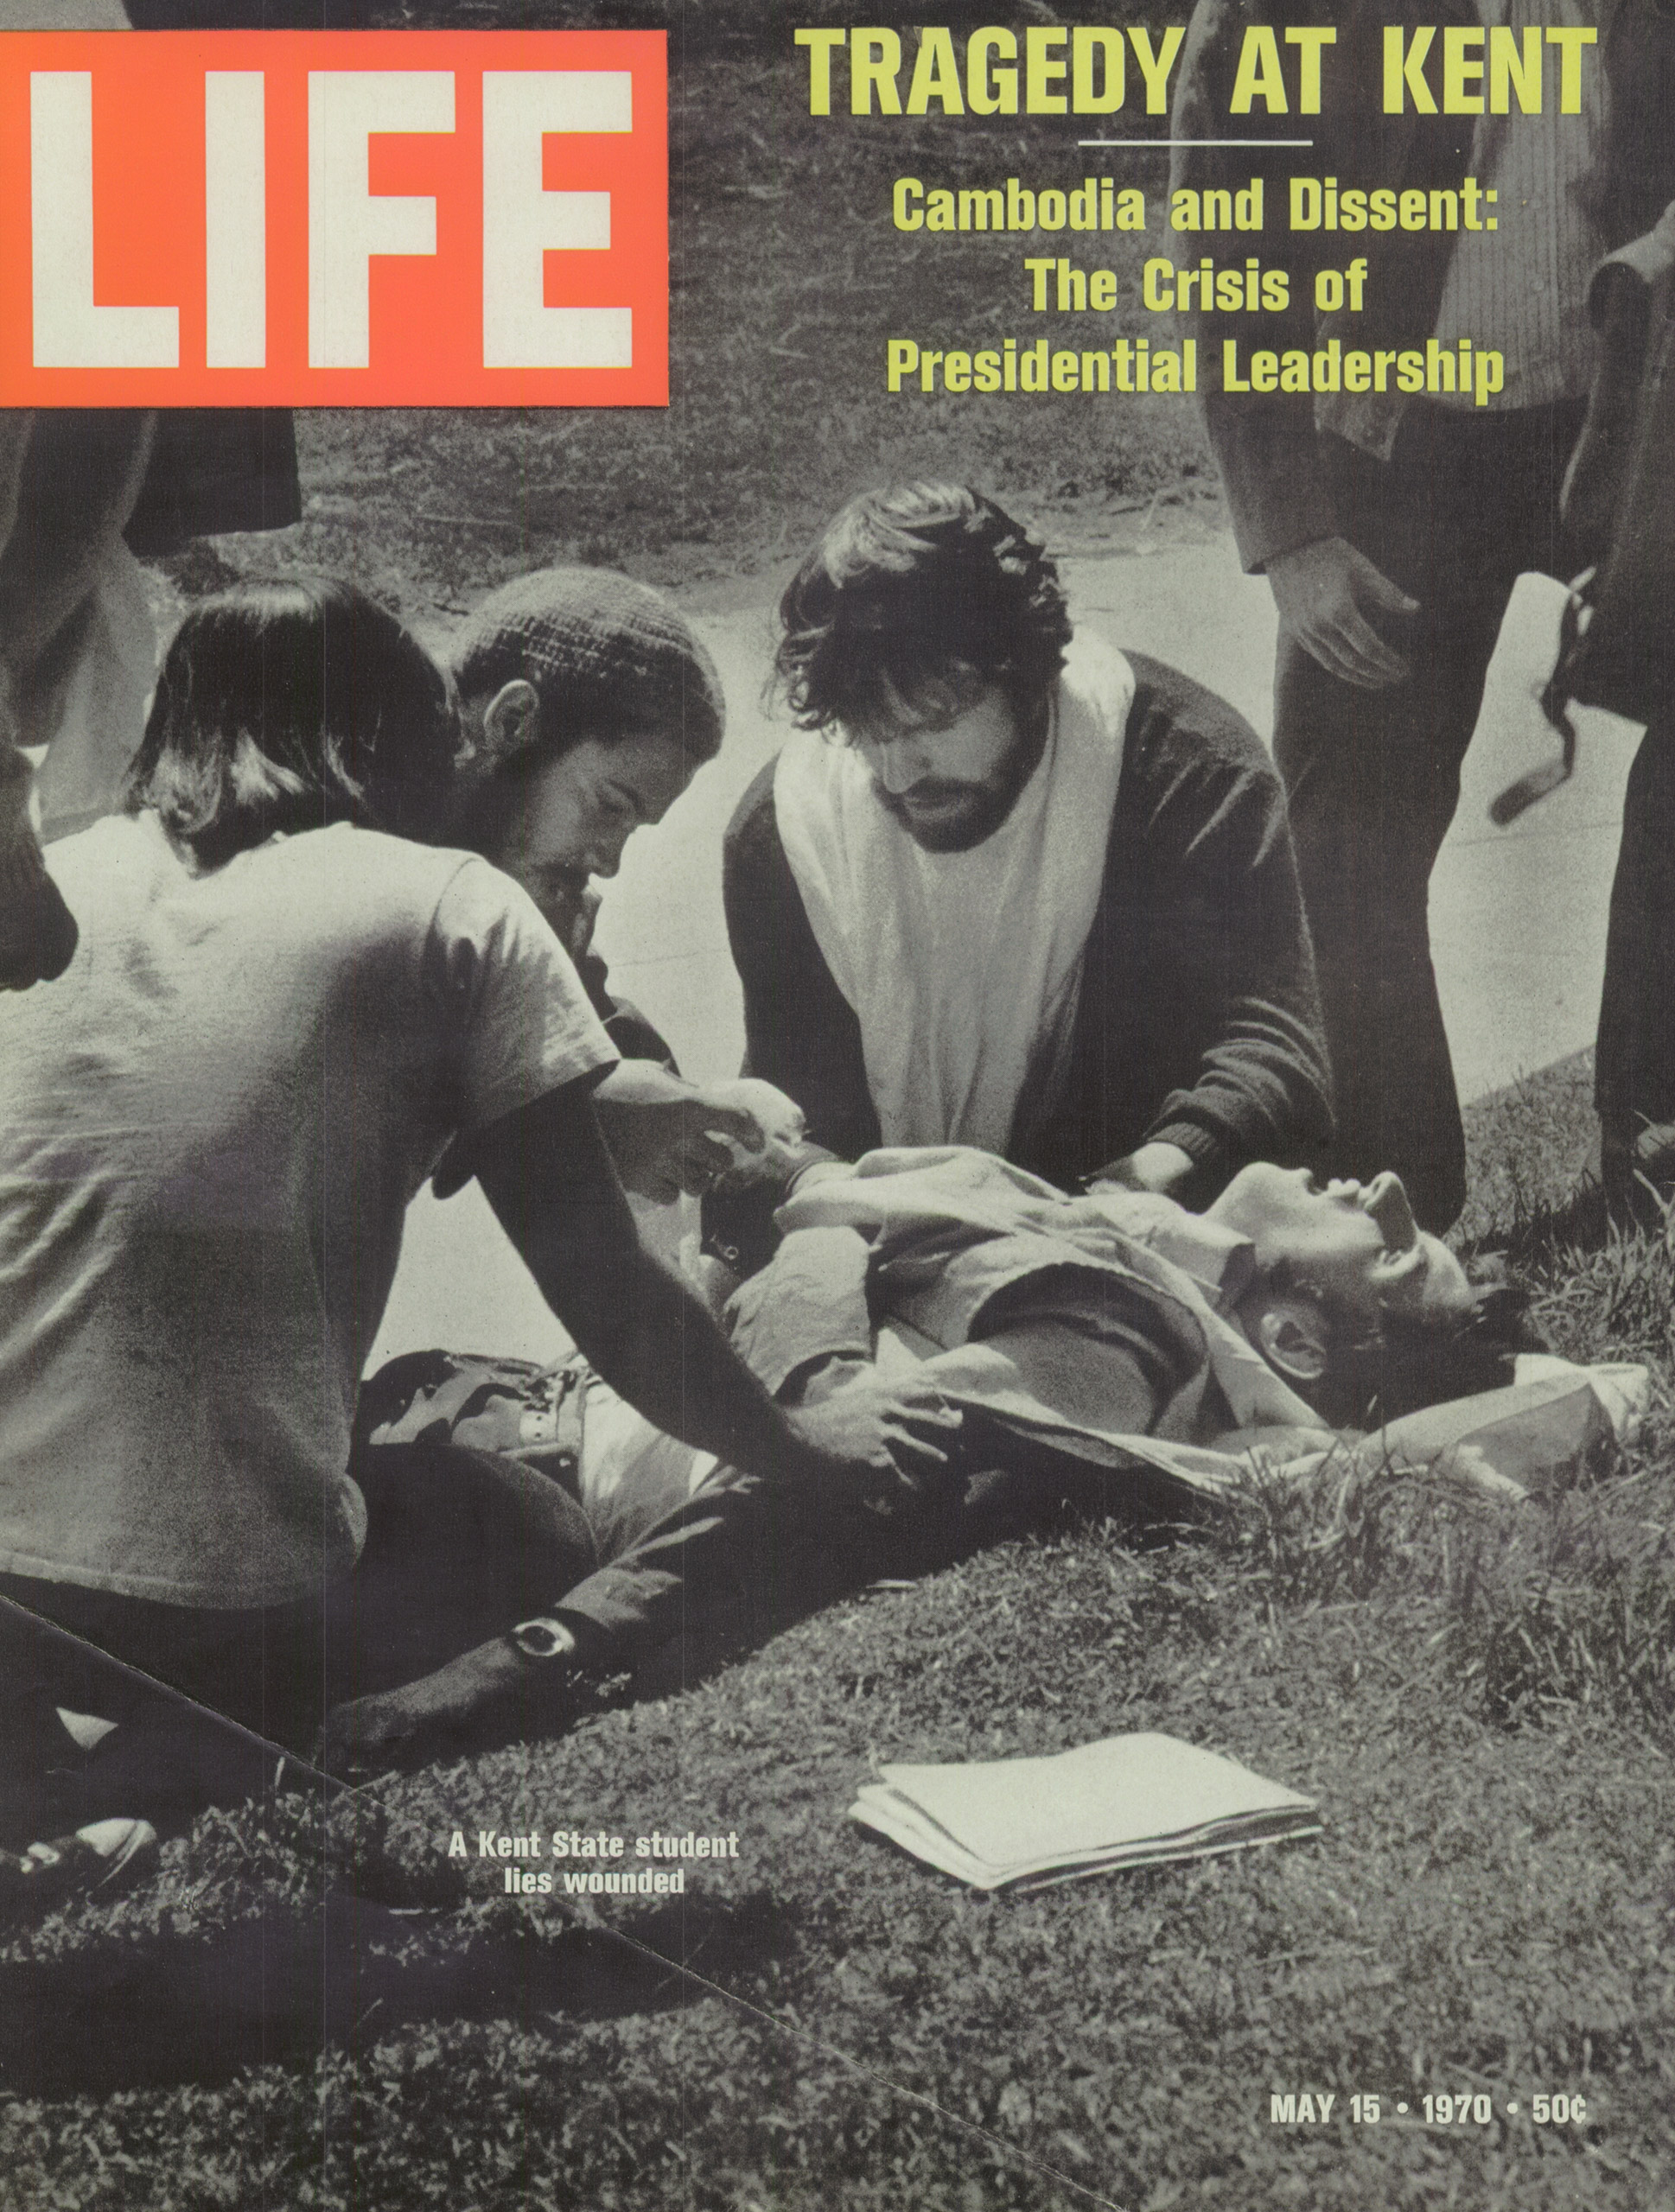 May 15, 1970 cover of LIFE magazine.